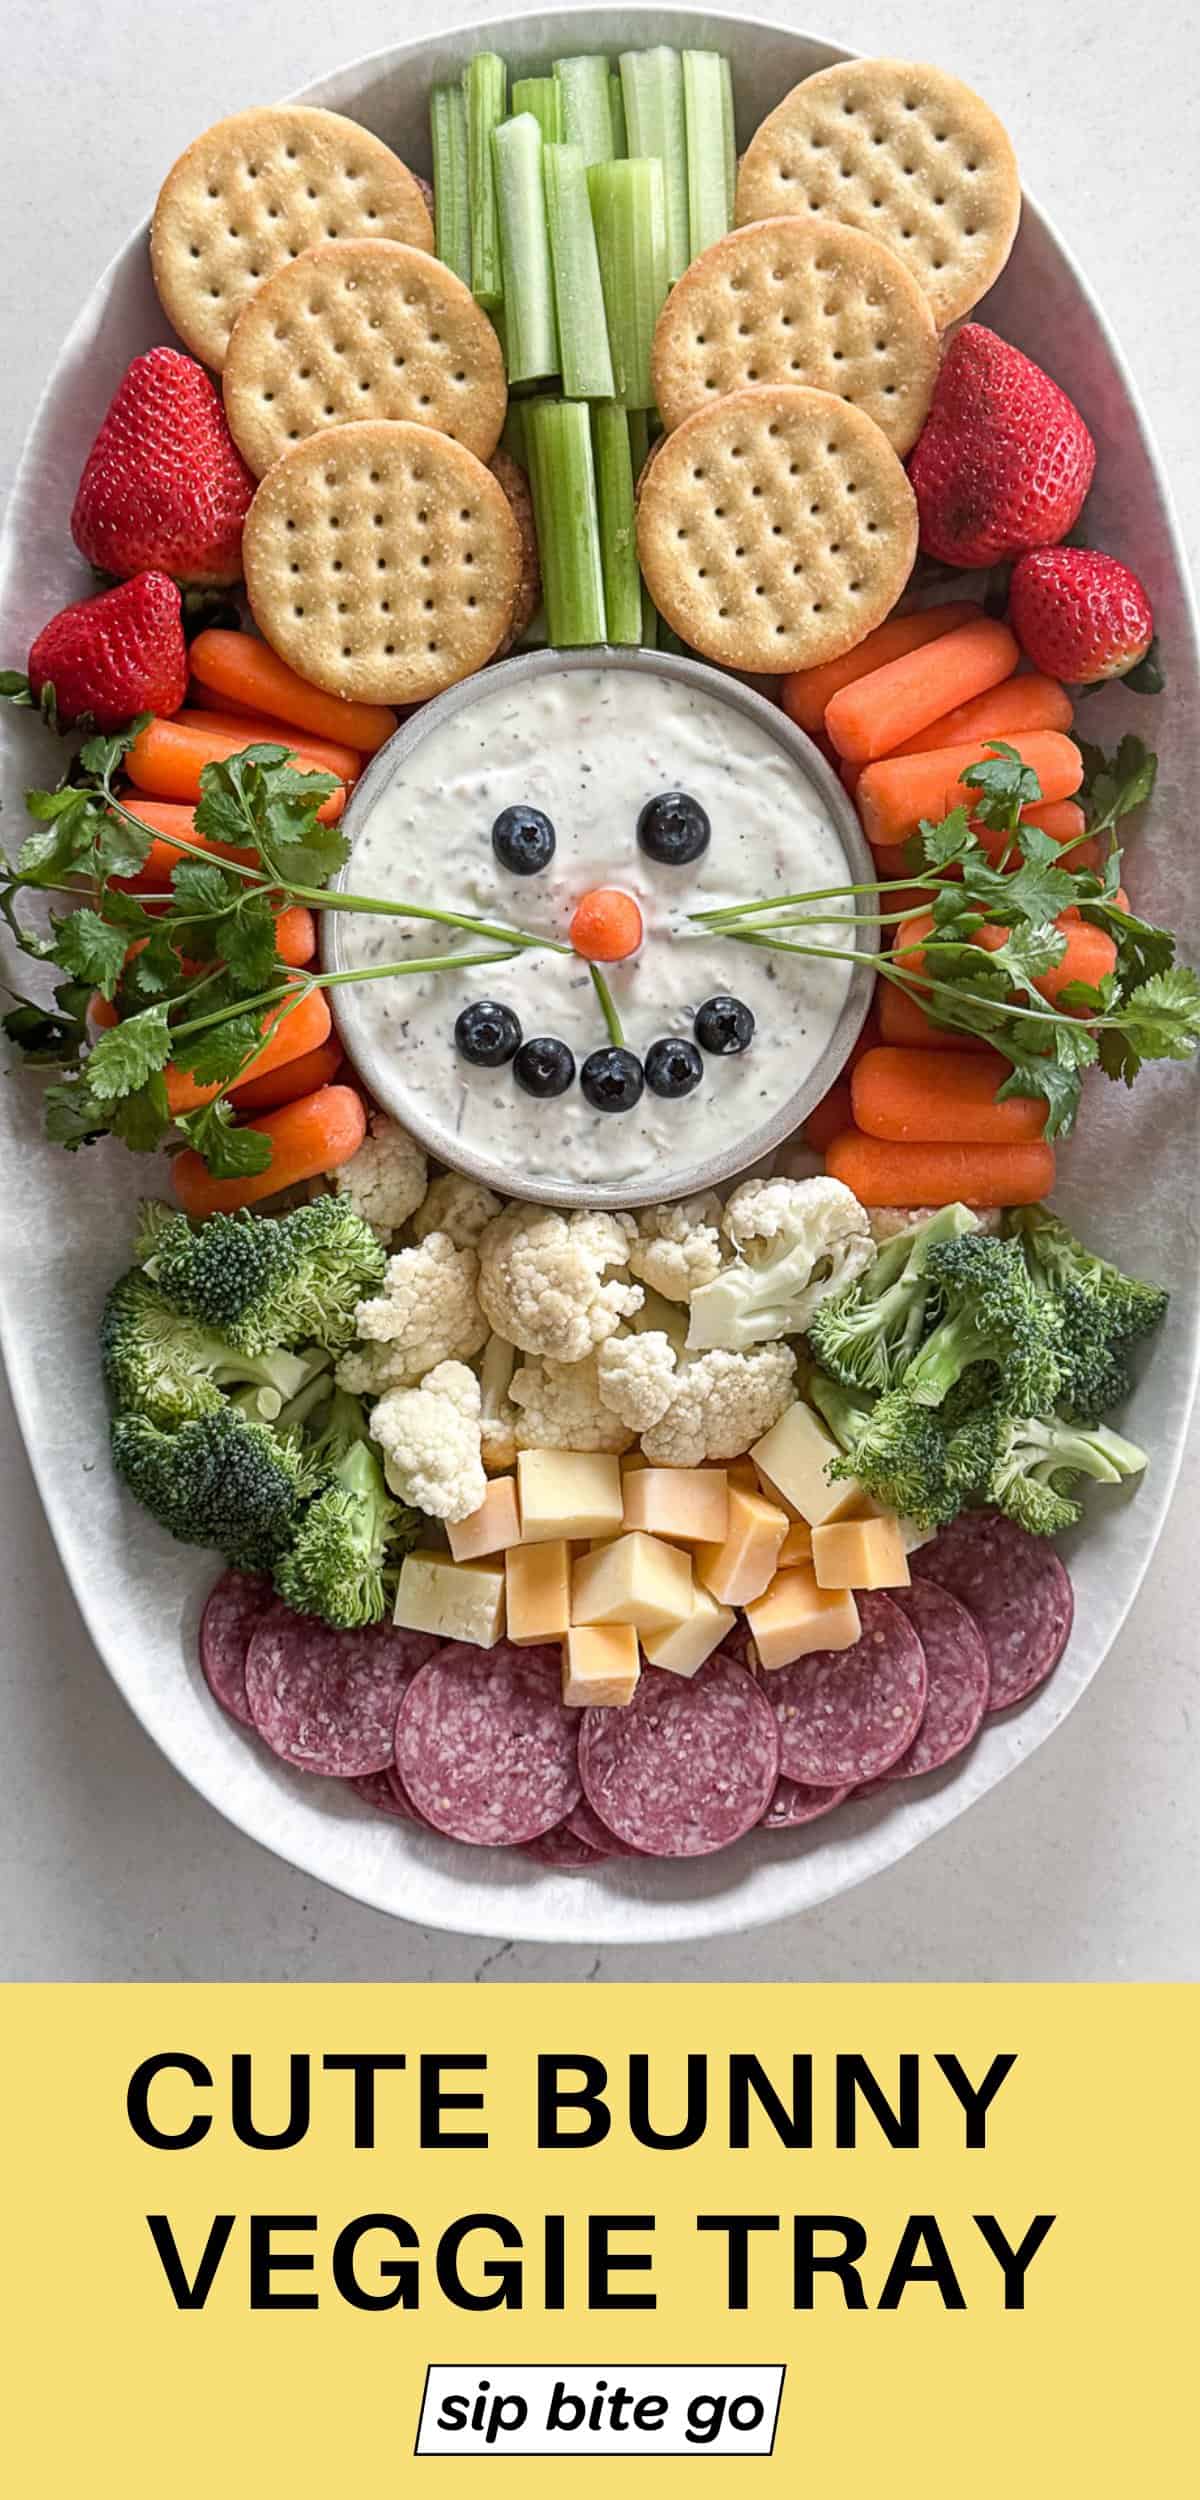 Cute Bunny Veggie Tray for Easter with text overlay